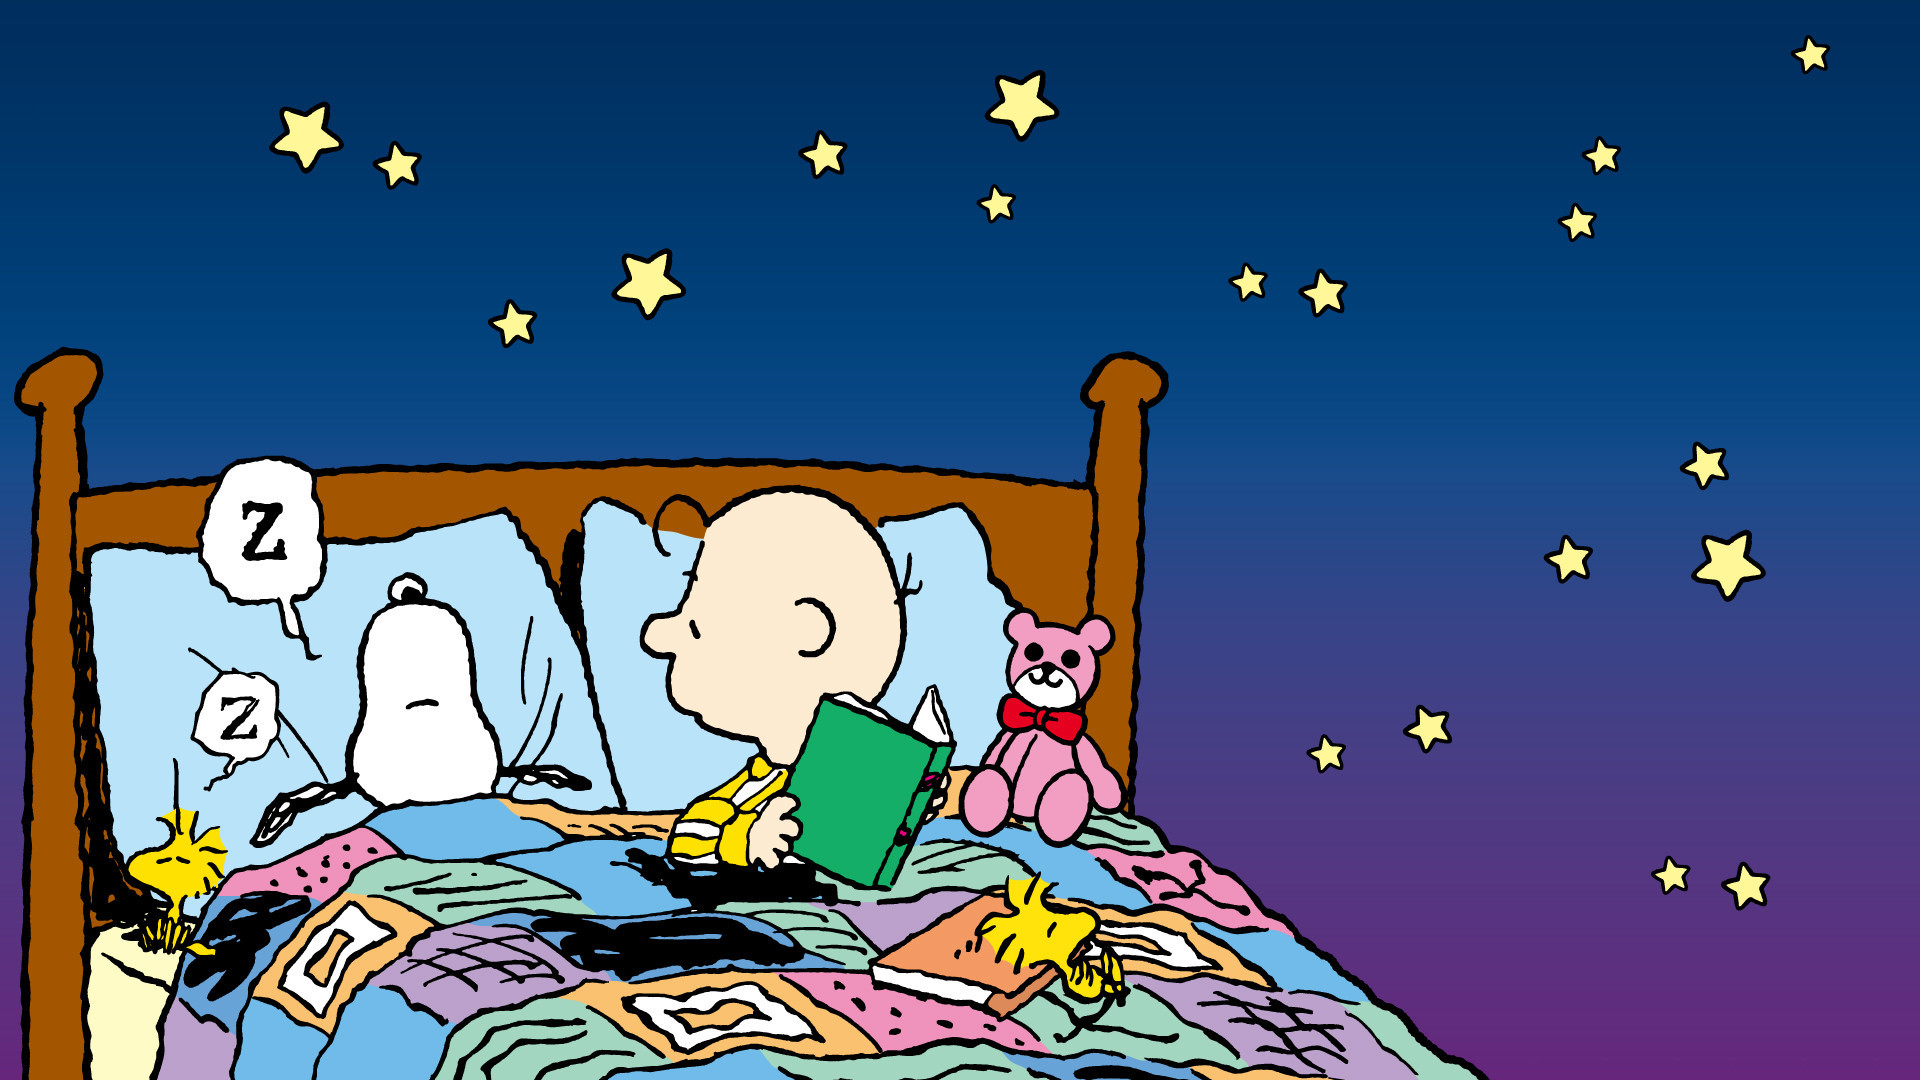 1920x1080 10 best ideas about Snoopy/Peanuts Backgrounds on Pinterest | The peanuts,  Search and